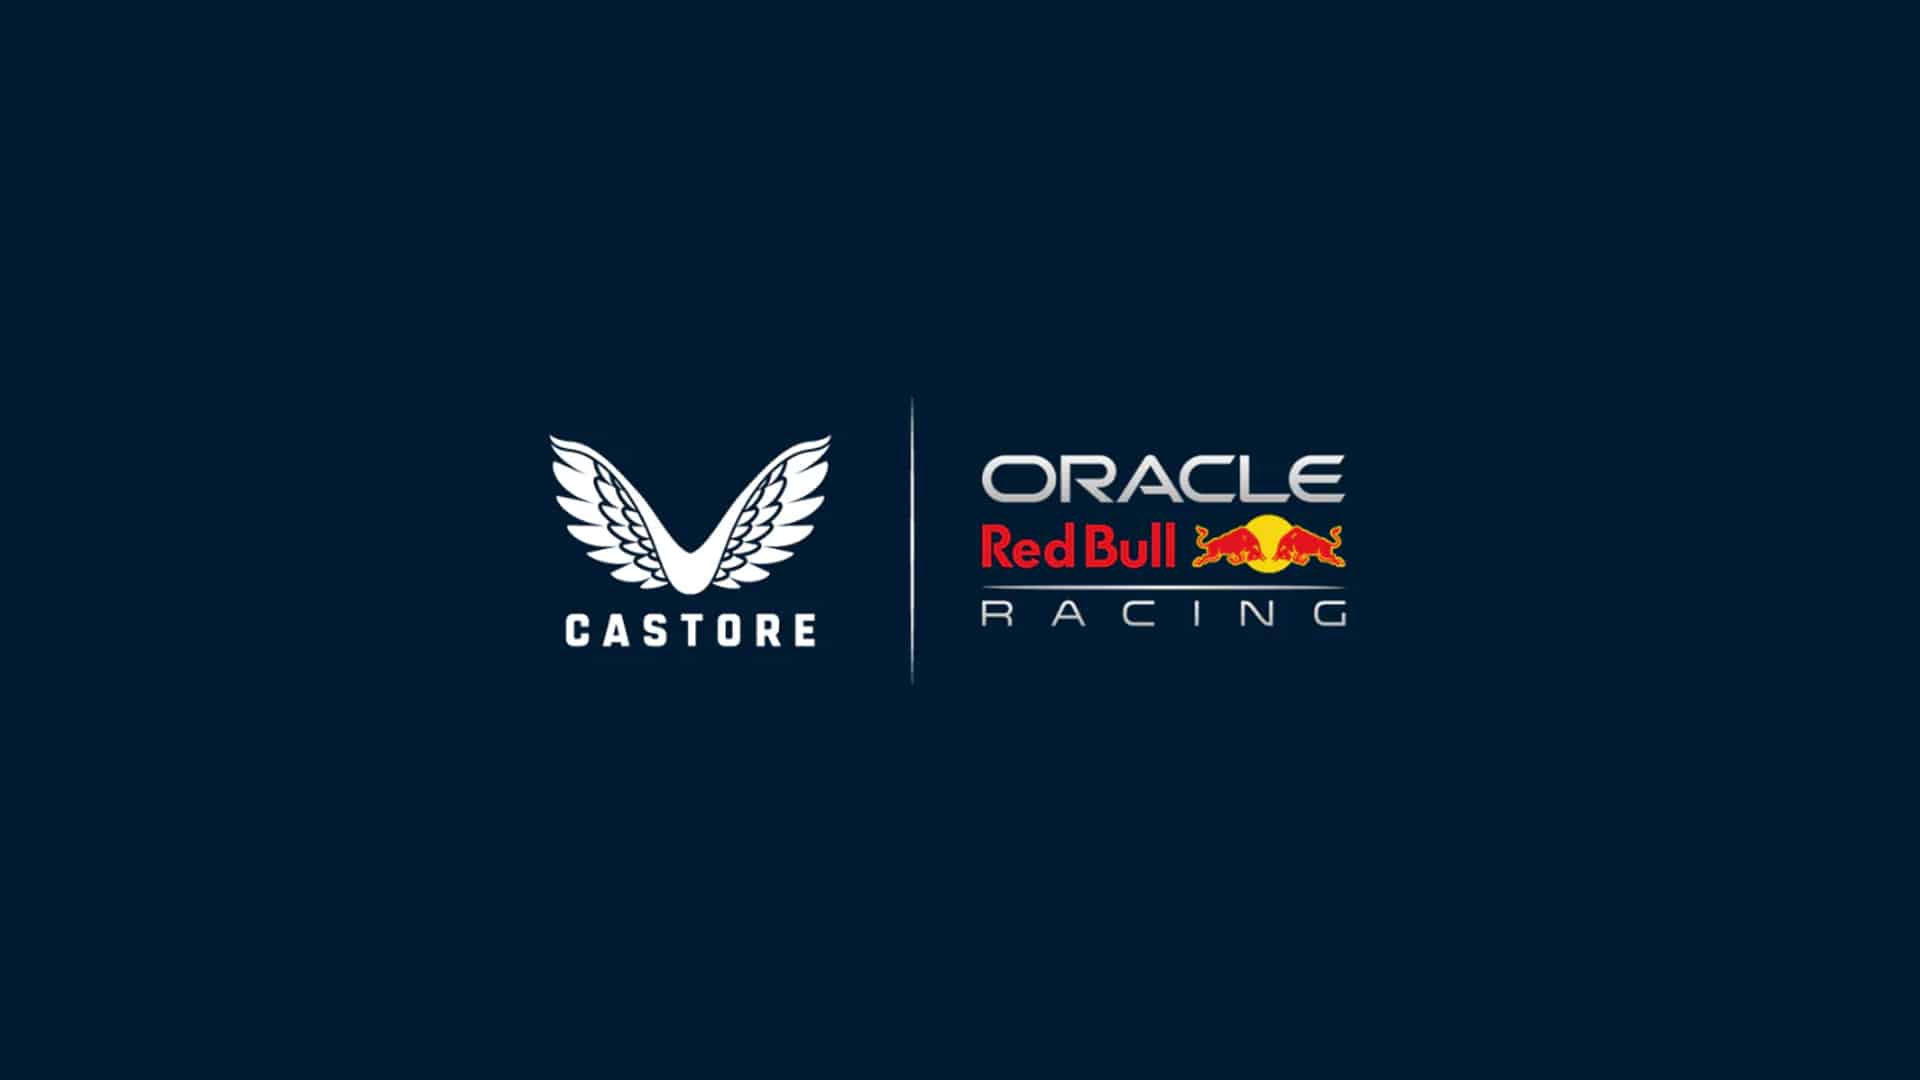 Red Bull F1 Projects :: Photos, videos, logos, illustrations and branding  :: Behance